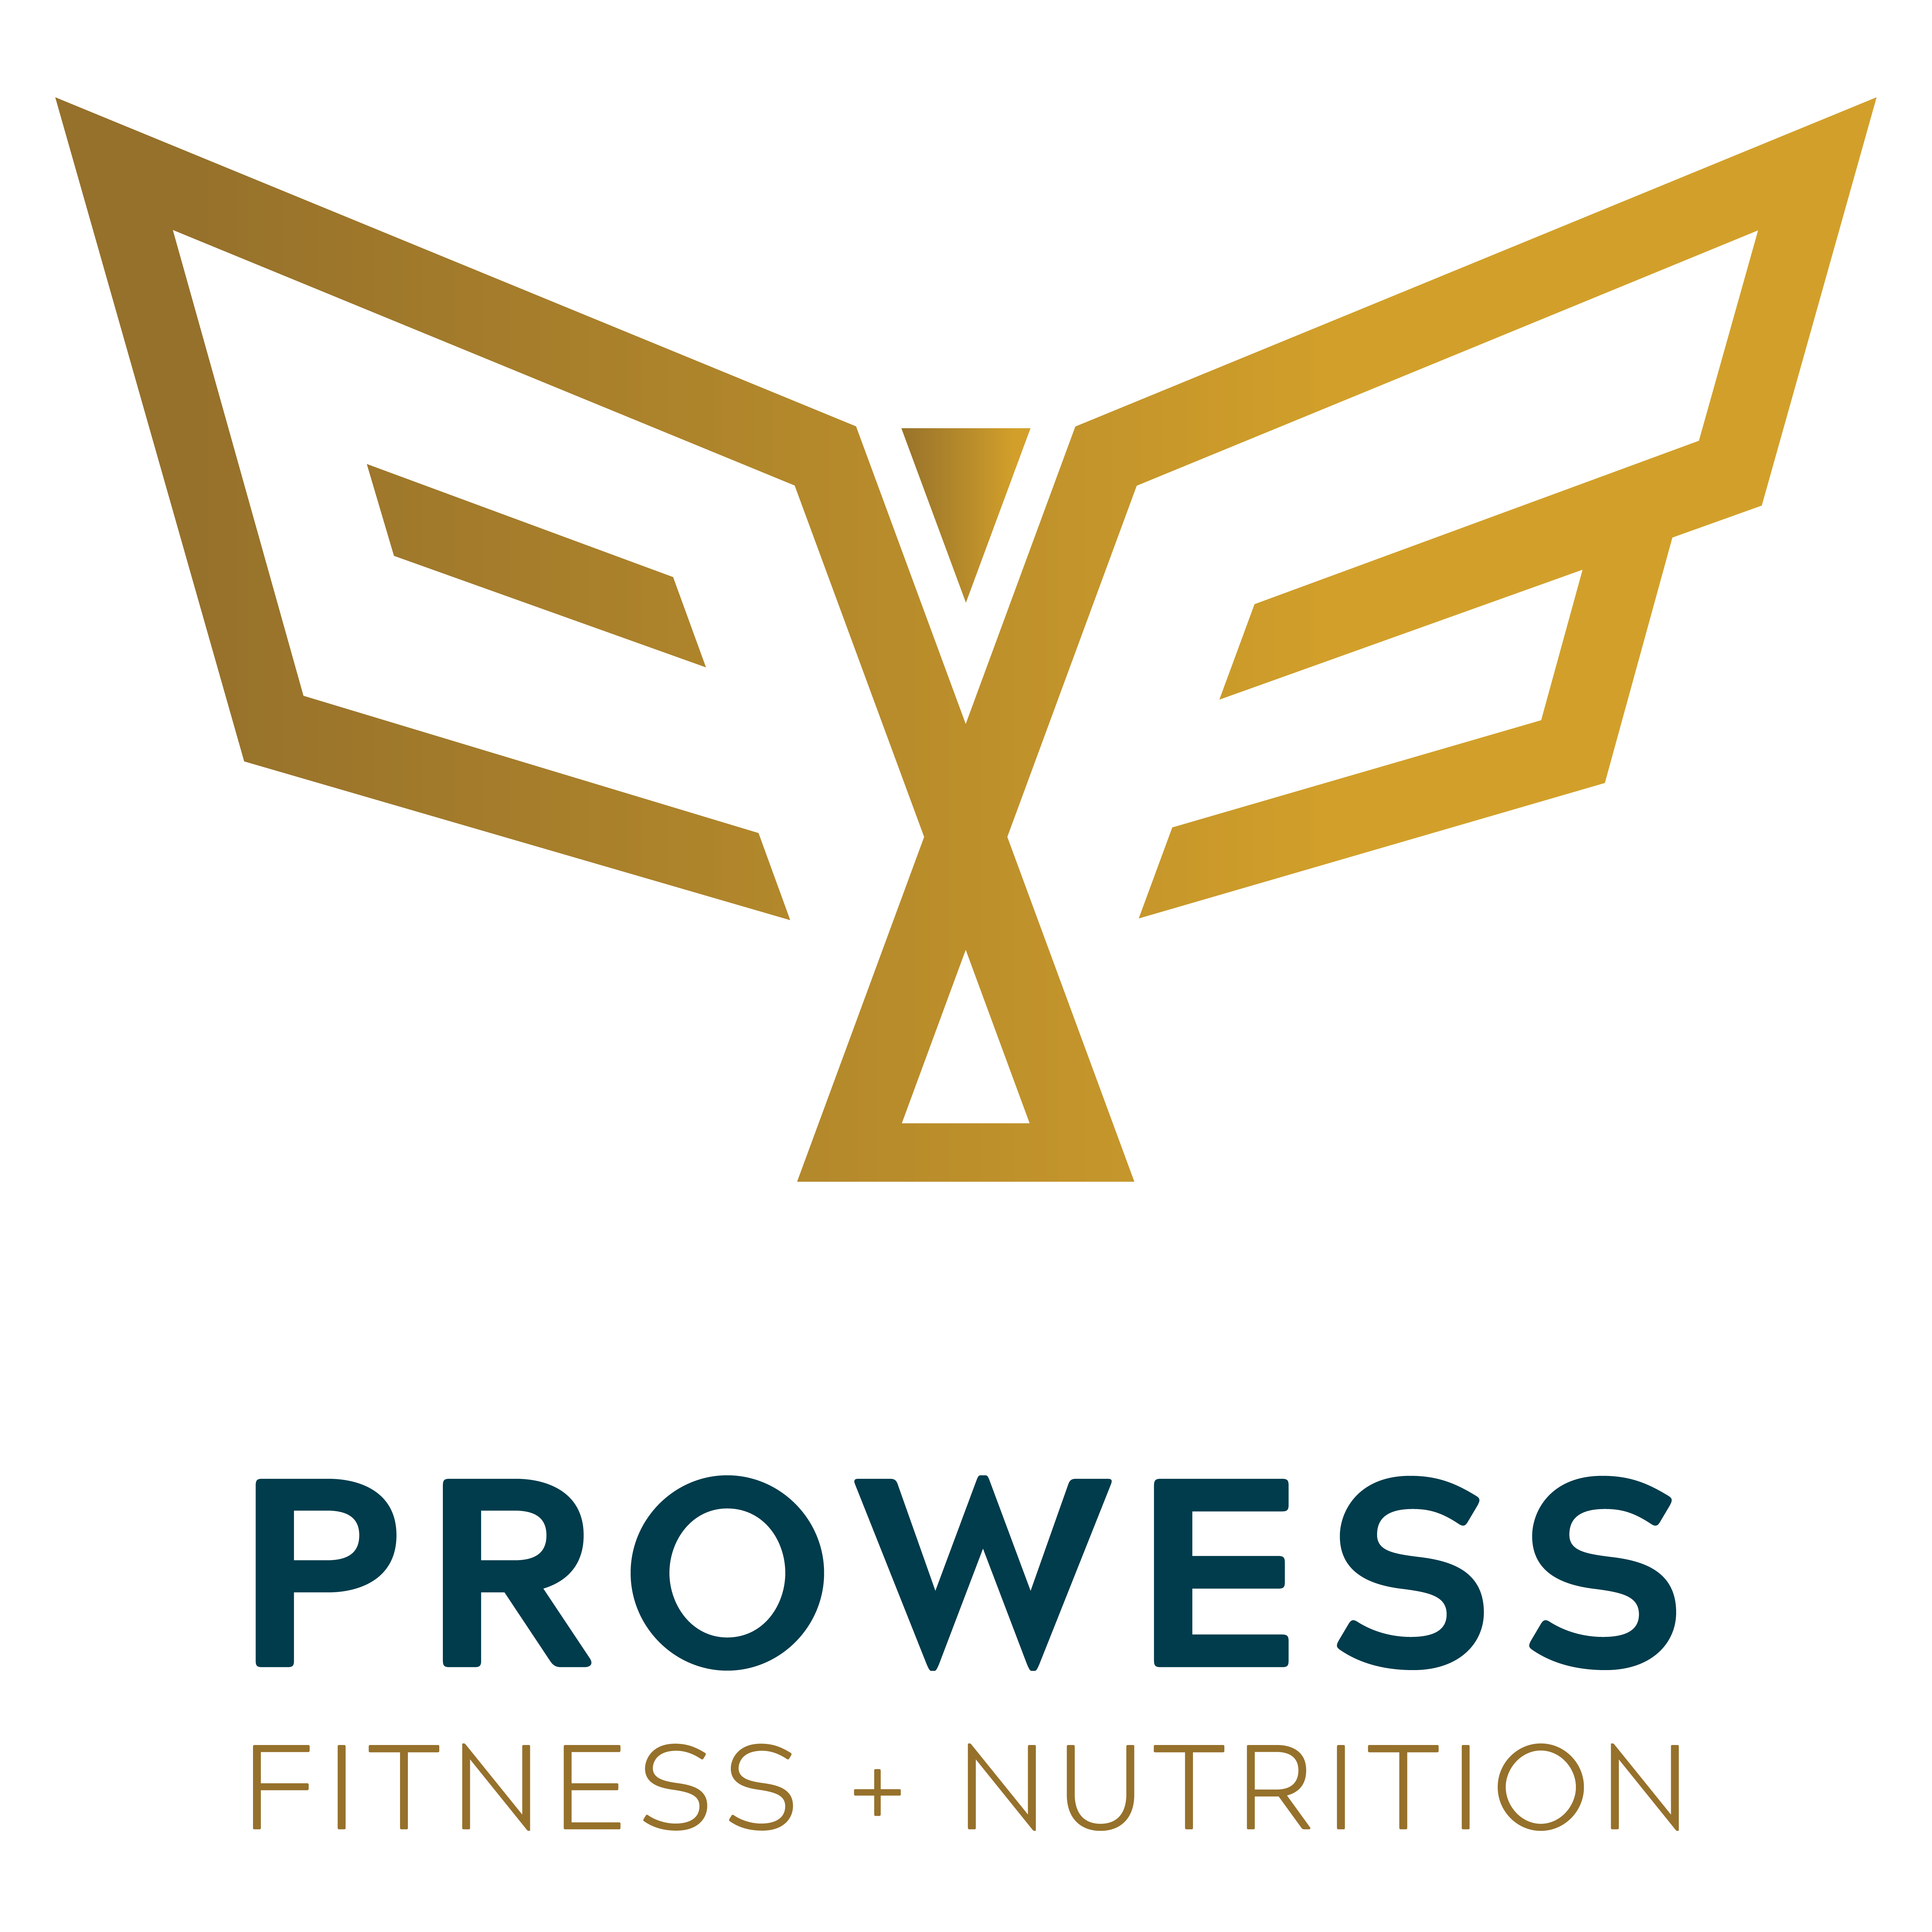 Prowess Fitness + Nutrition